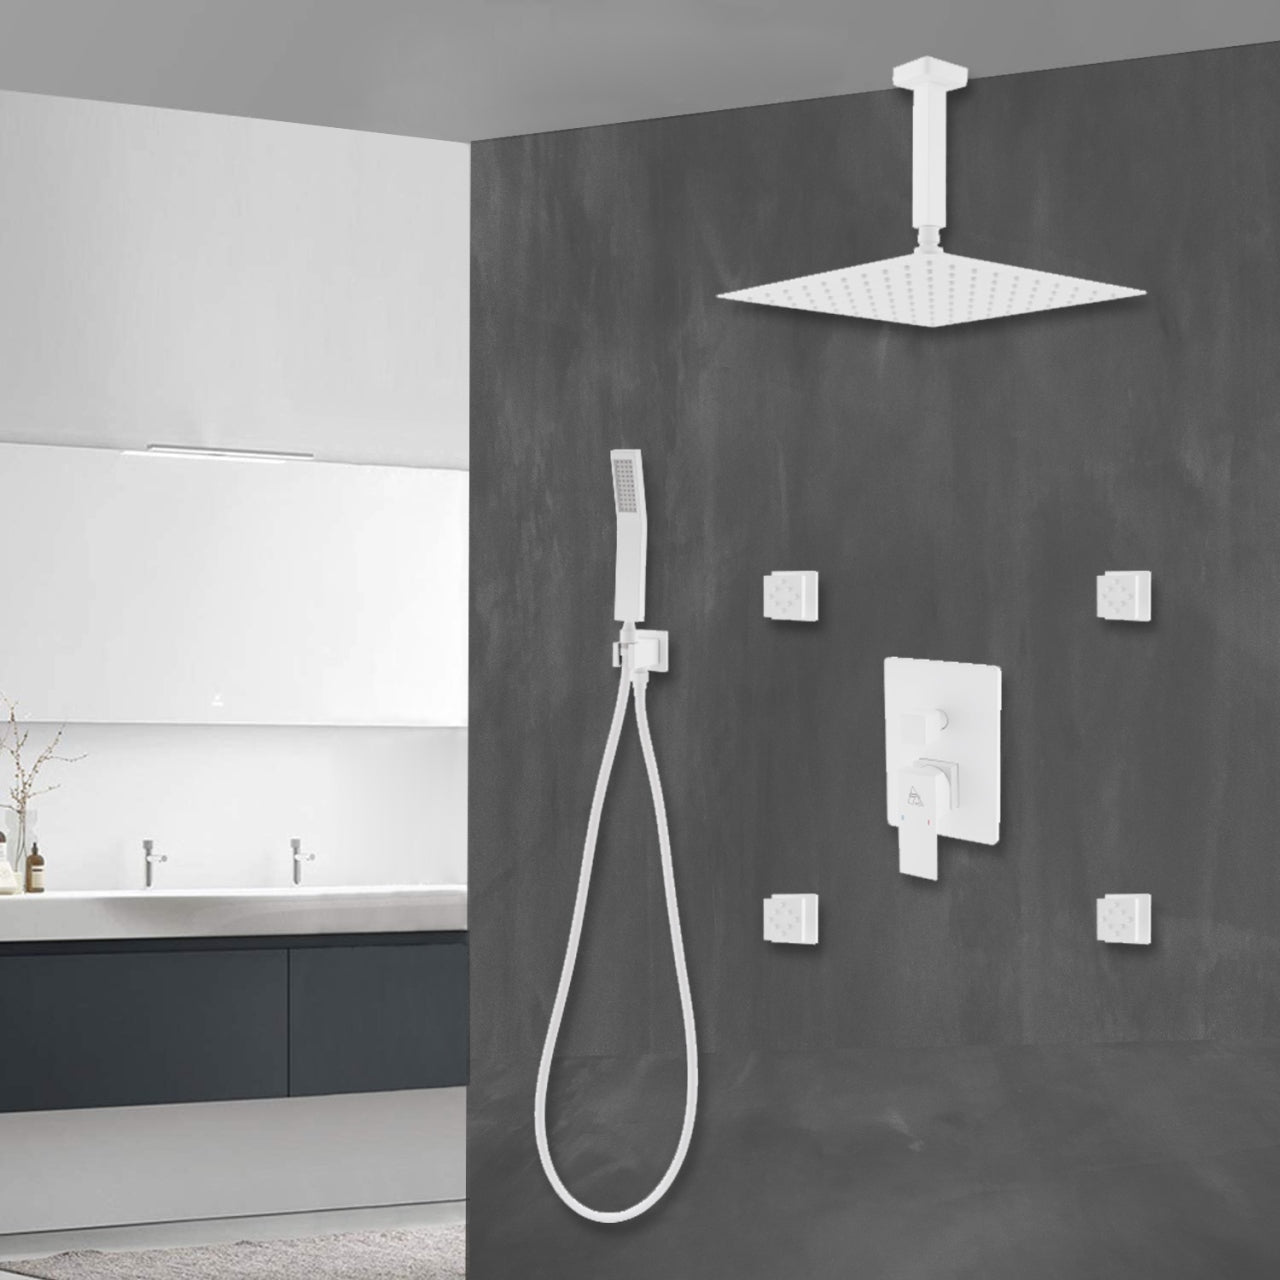 Aqua Piazza Brass Shower Set with Ceiling Mount Square Rain Shower, Handheld and 4 Body Jets - Home and Bath Depot